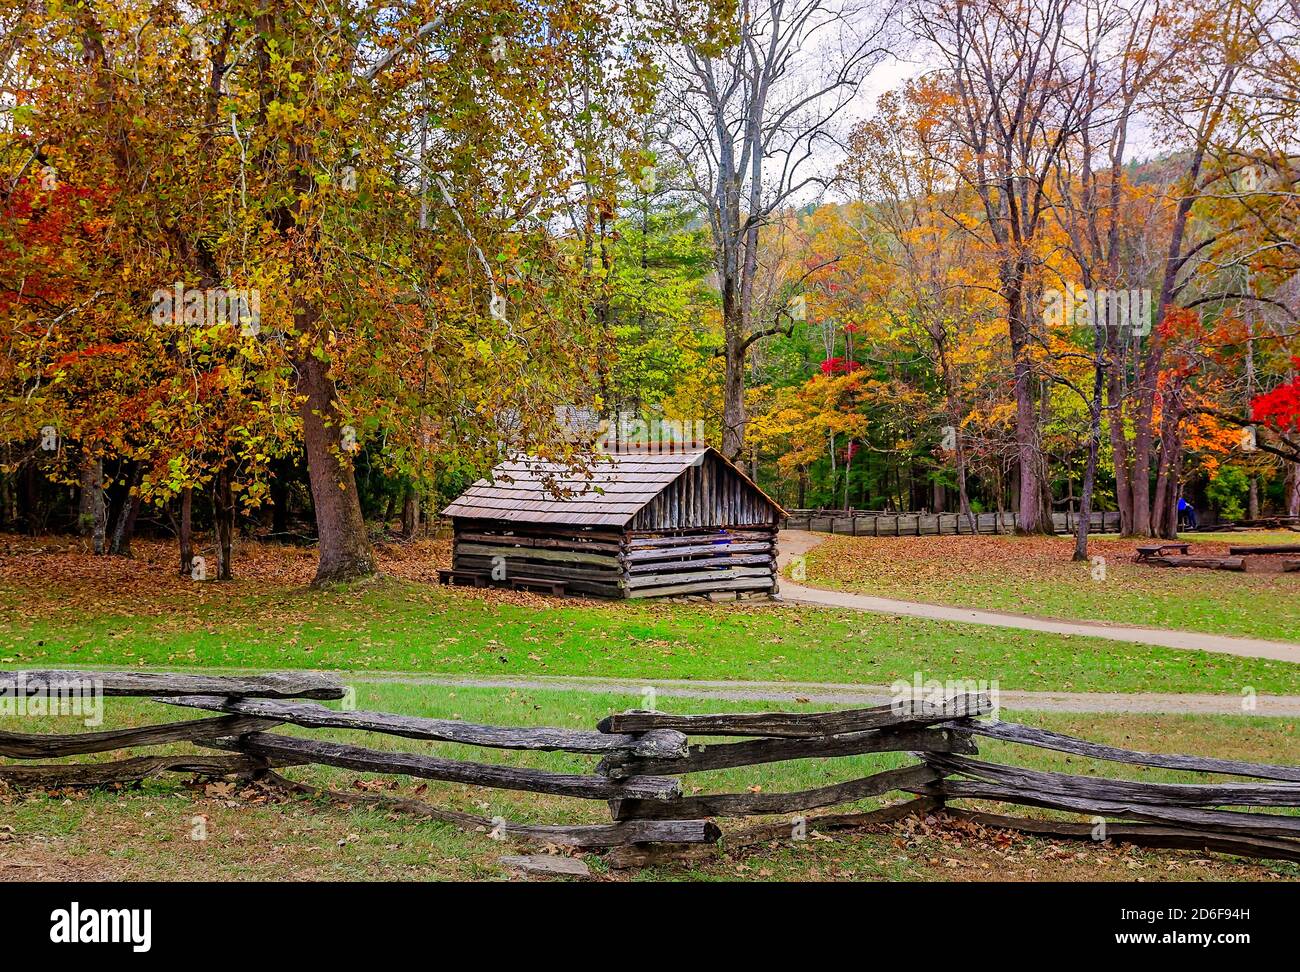 Fall foliage surrounds the blacksmith shop at the John P. Cable Mill Complex in Great Smoky Mountains National Park in Townsend, Tennessee. Stock Photo